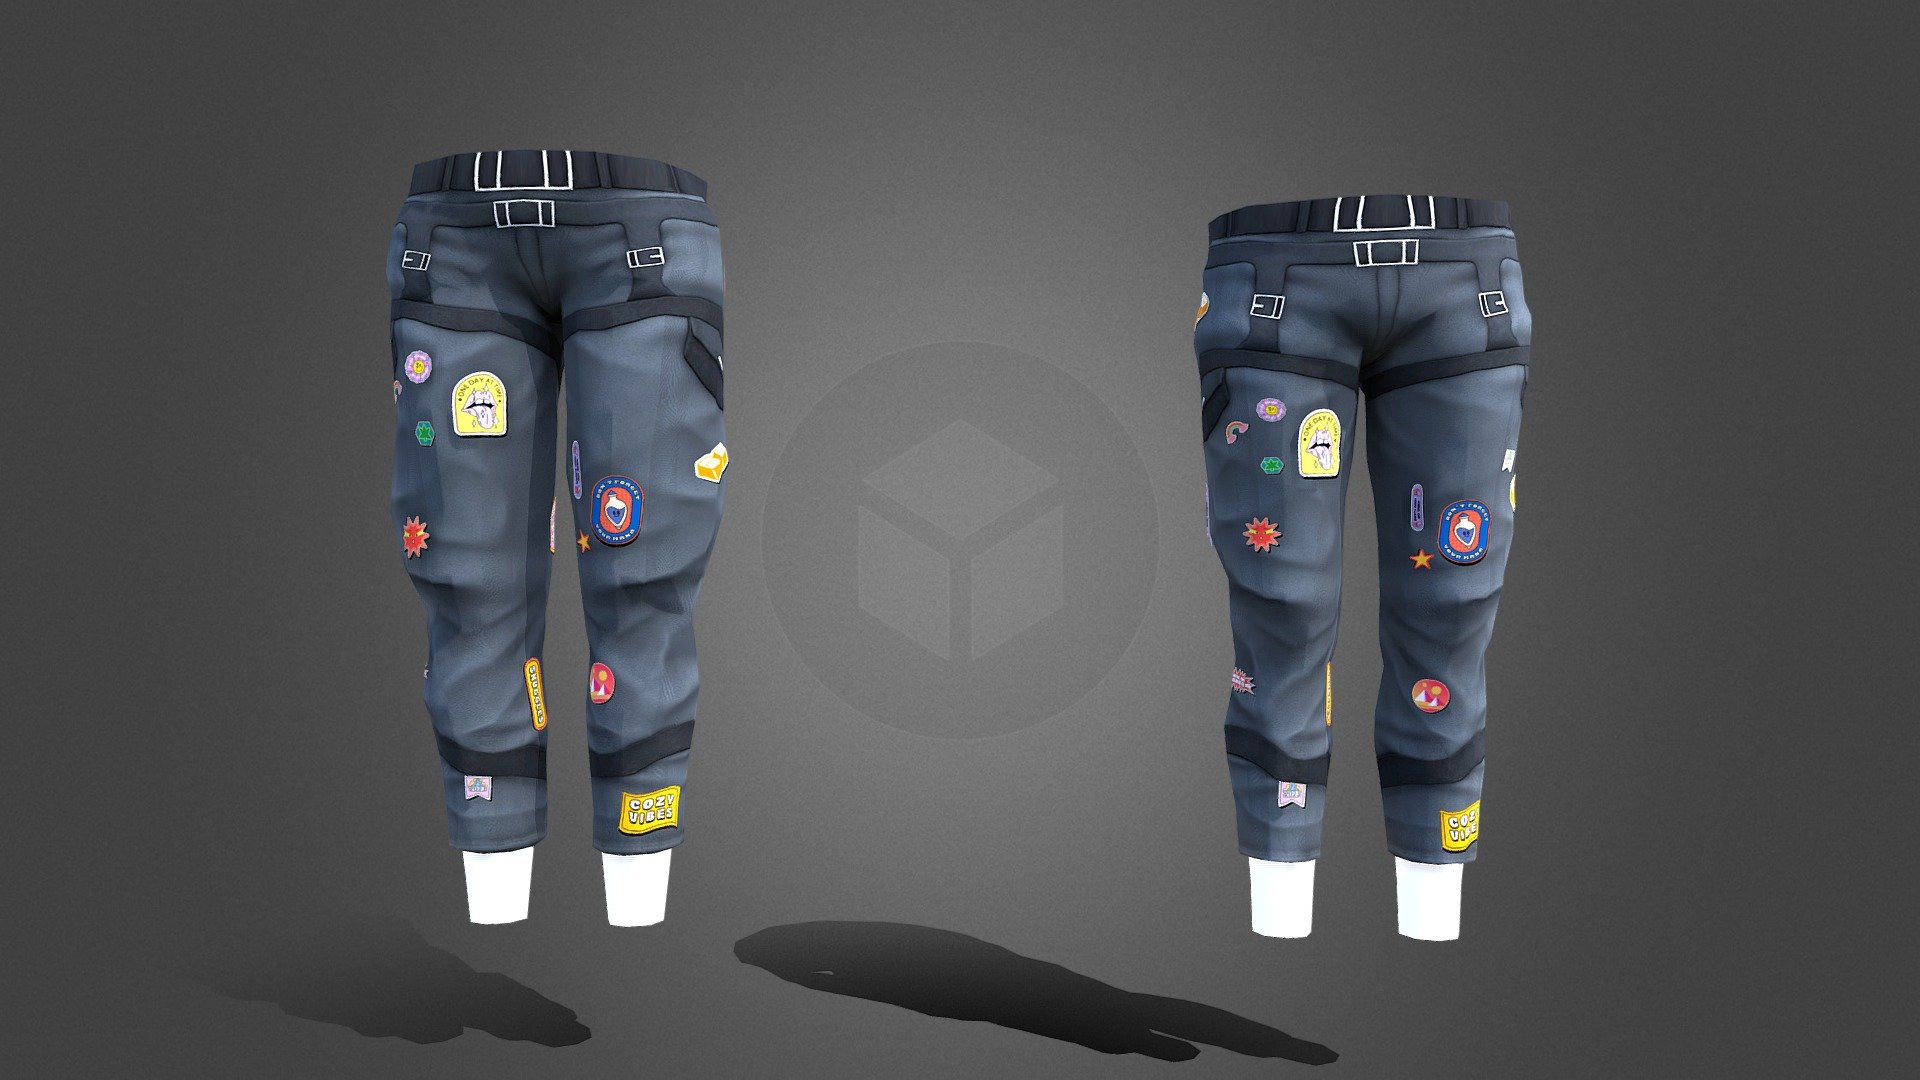 Wearable reward for the End Of Year Quest in Decentraland. These unisex trousers have straps, buckles, belts, pockets and lots of fun patches. Which patch is your favourite?

Play the End Of Year 2023 Quest in Decentraland at coordinates 148, -100.

Get your pair here.

Created by KJWalker of LowPolyModels 3d model